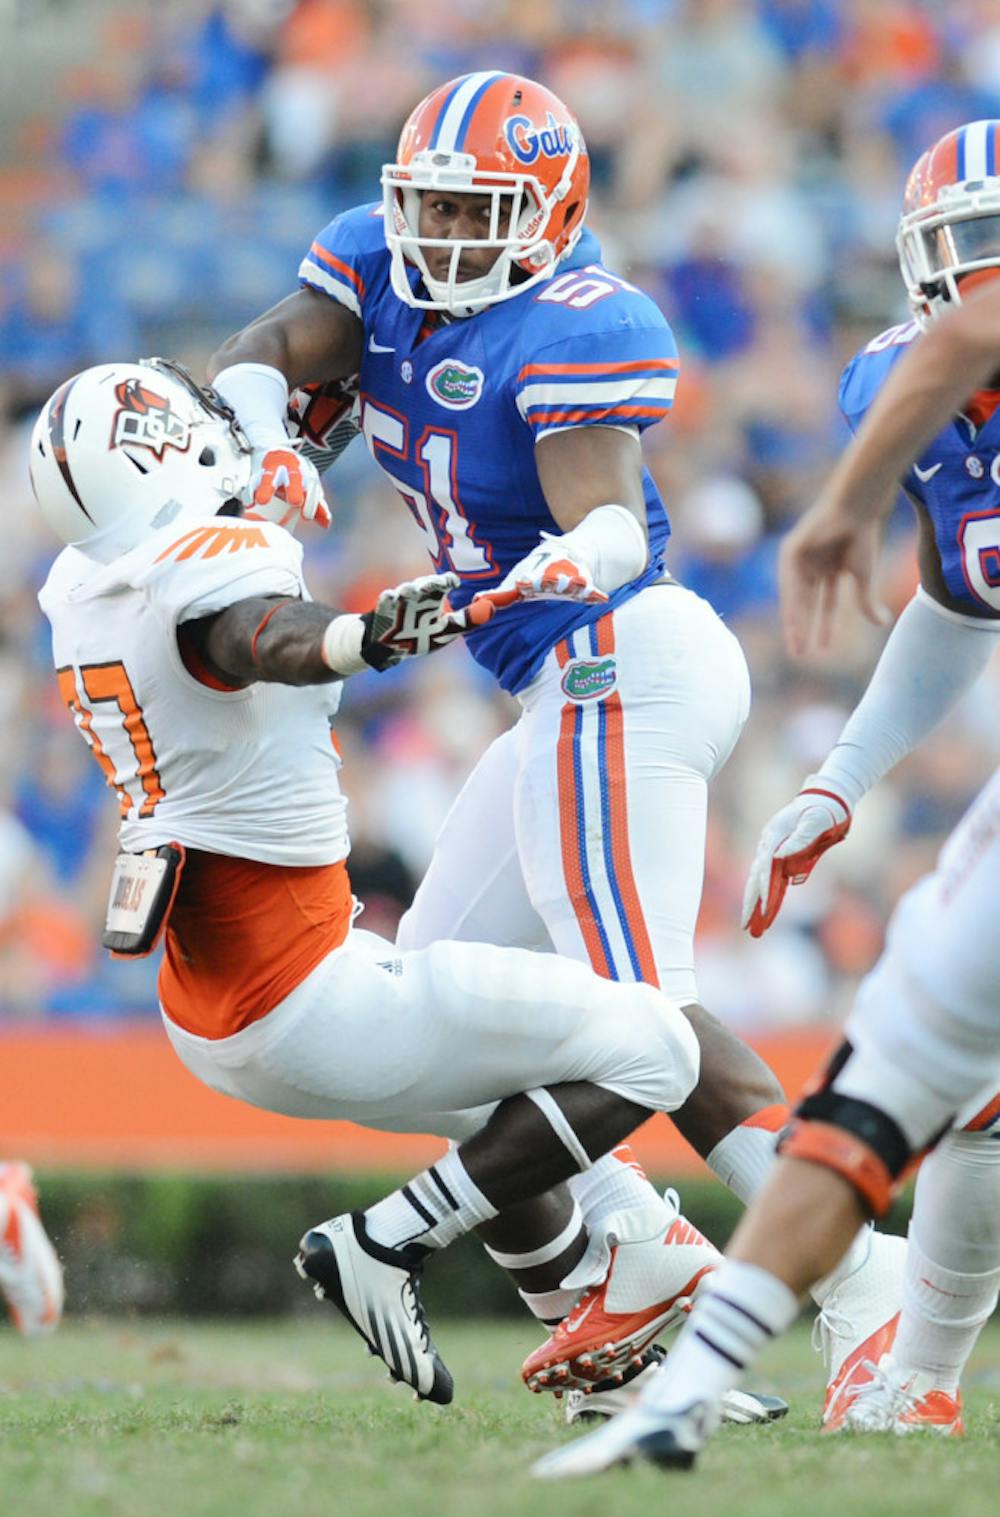 <p align="justify">Florida linebacker Michael Taylor blocks an opponent during UF’s 27-14 victory against Bowling Green on Sept. 1, 2012.</p>